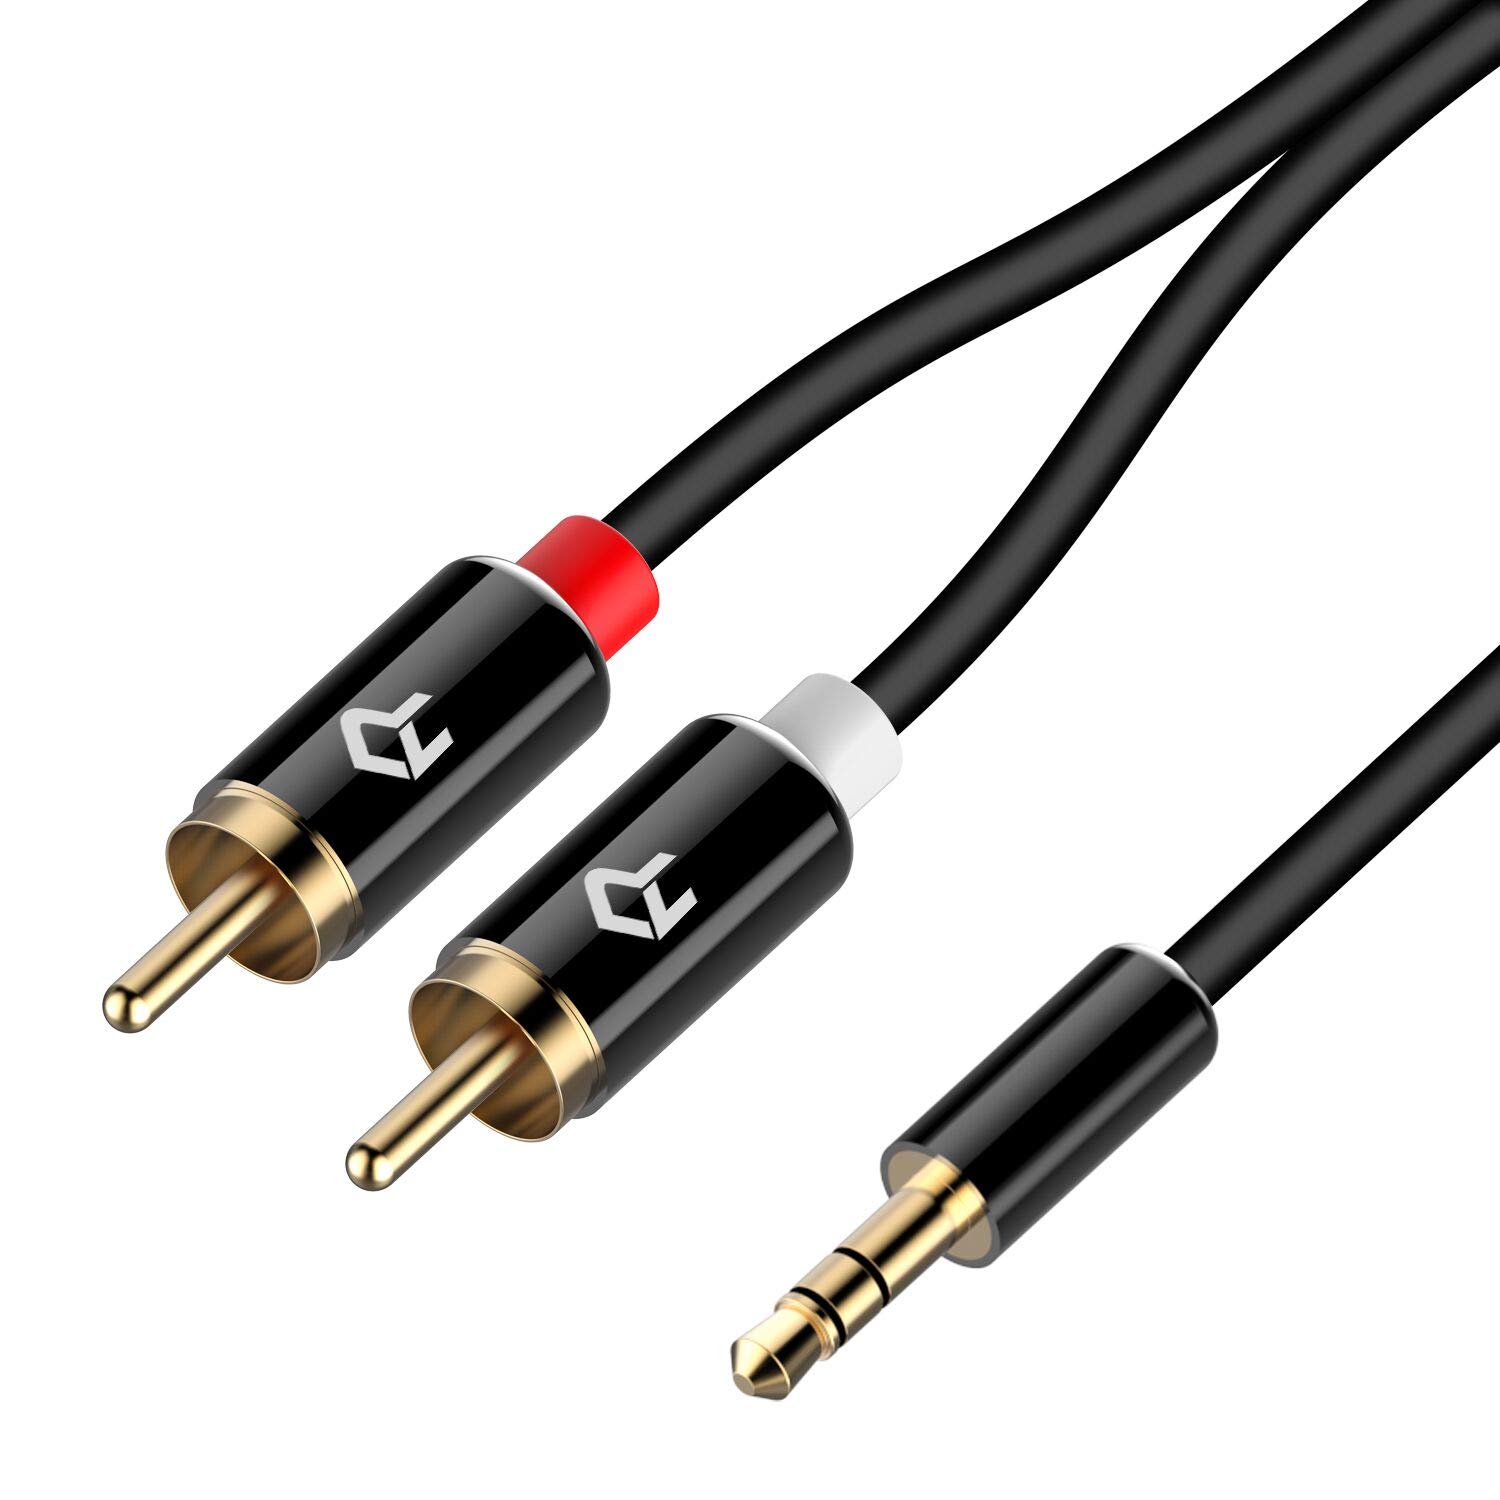 Rankie 3.5mm to 2-Male RCA Adapter Cable - 6 Feet